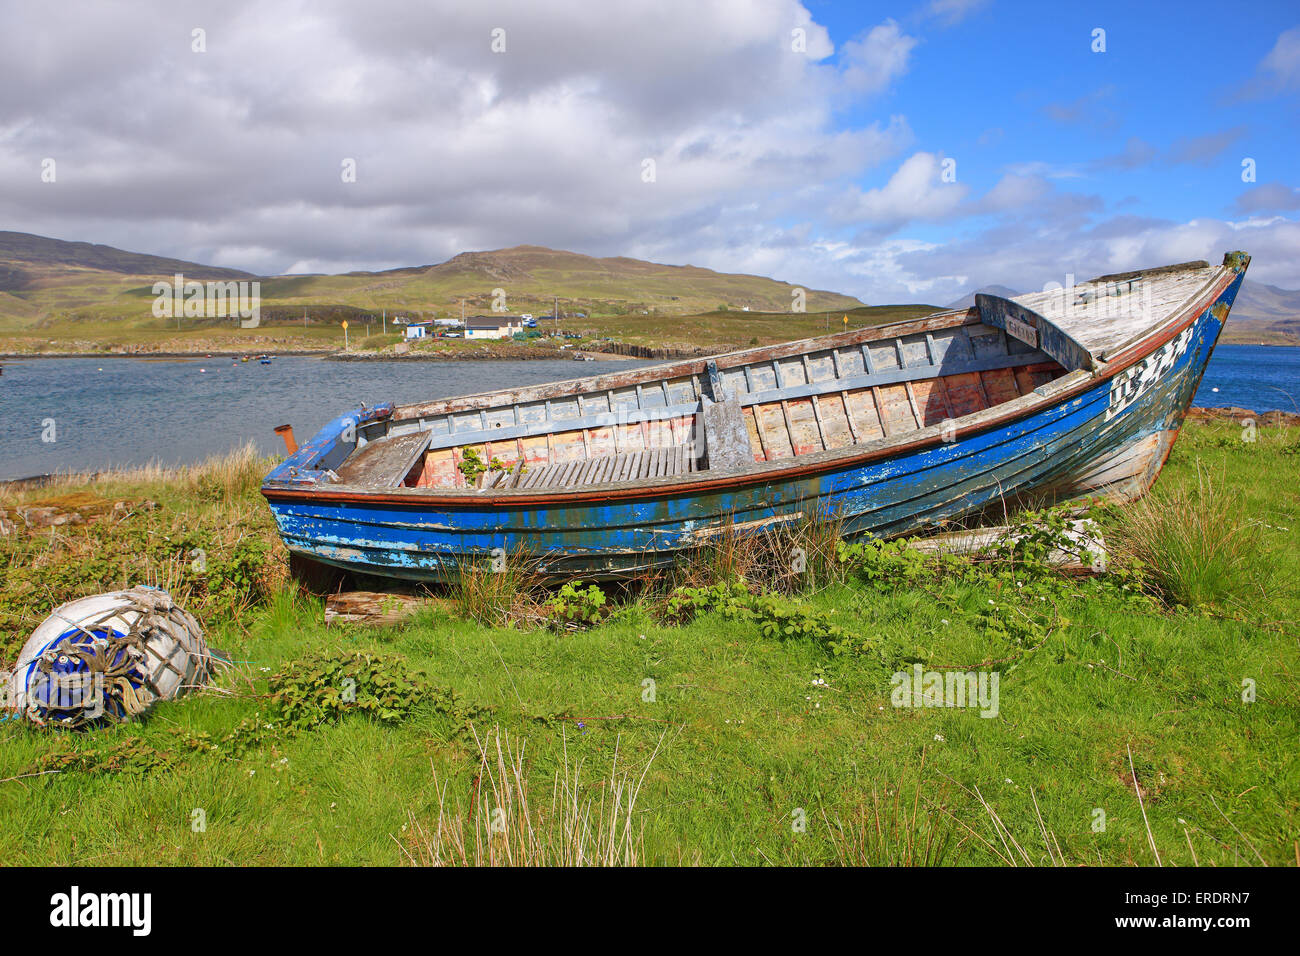 old-boat-on-the-isle-of-ulva-with-the-so